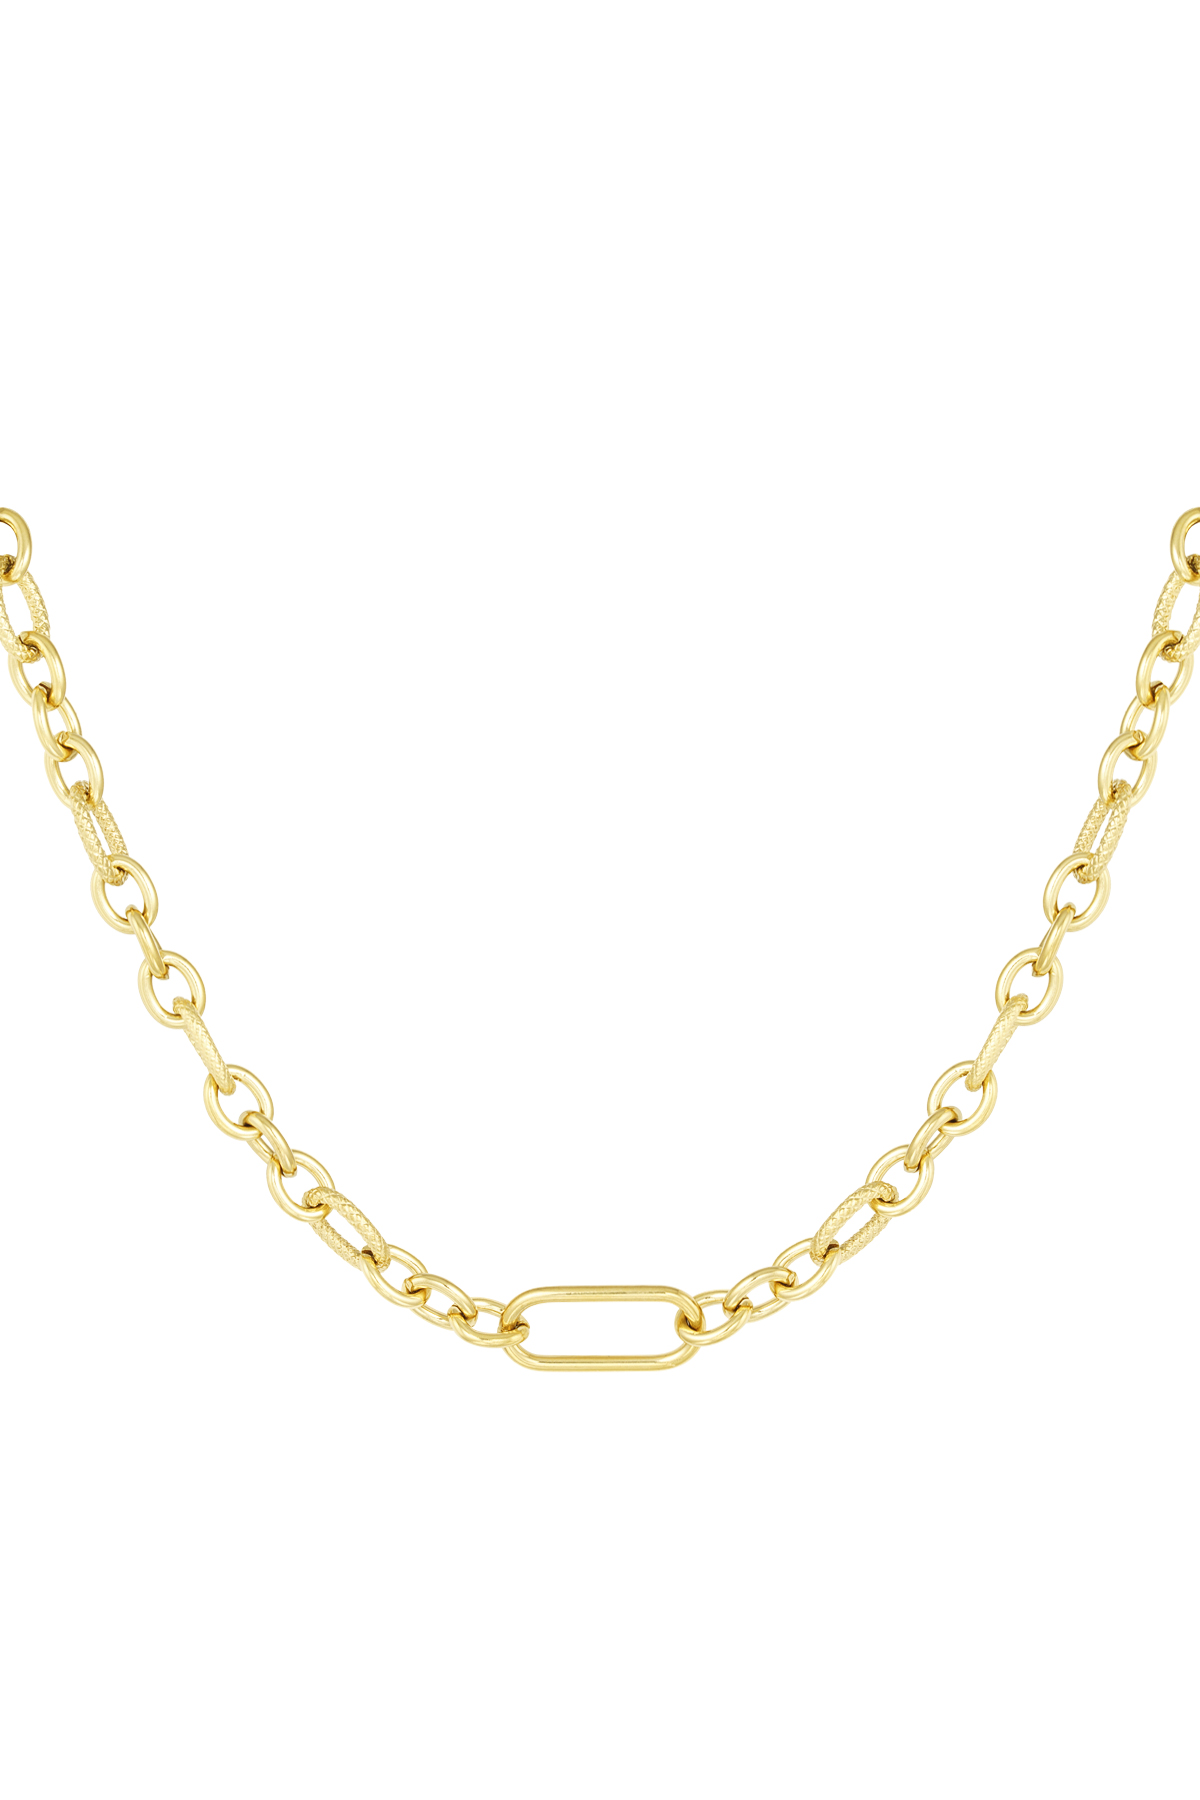 Necklace different links - gold h5 